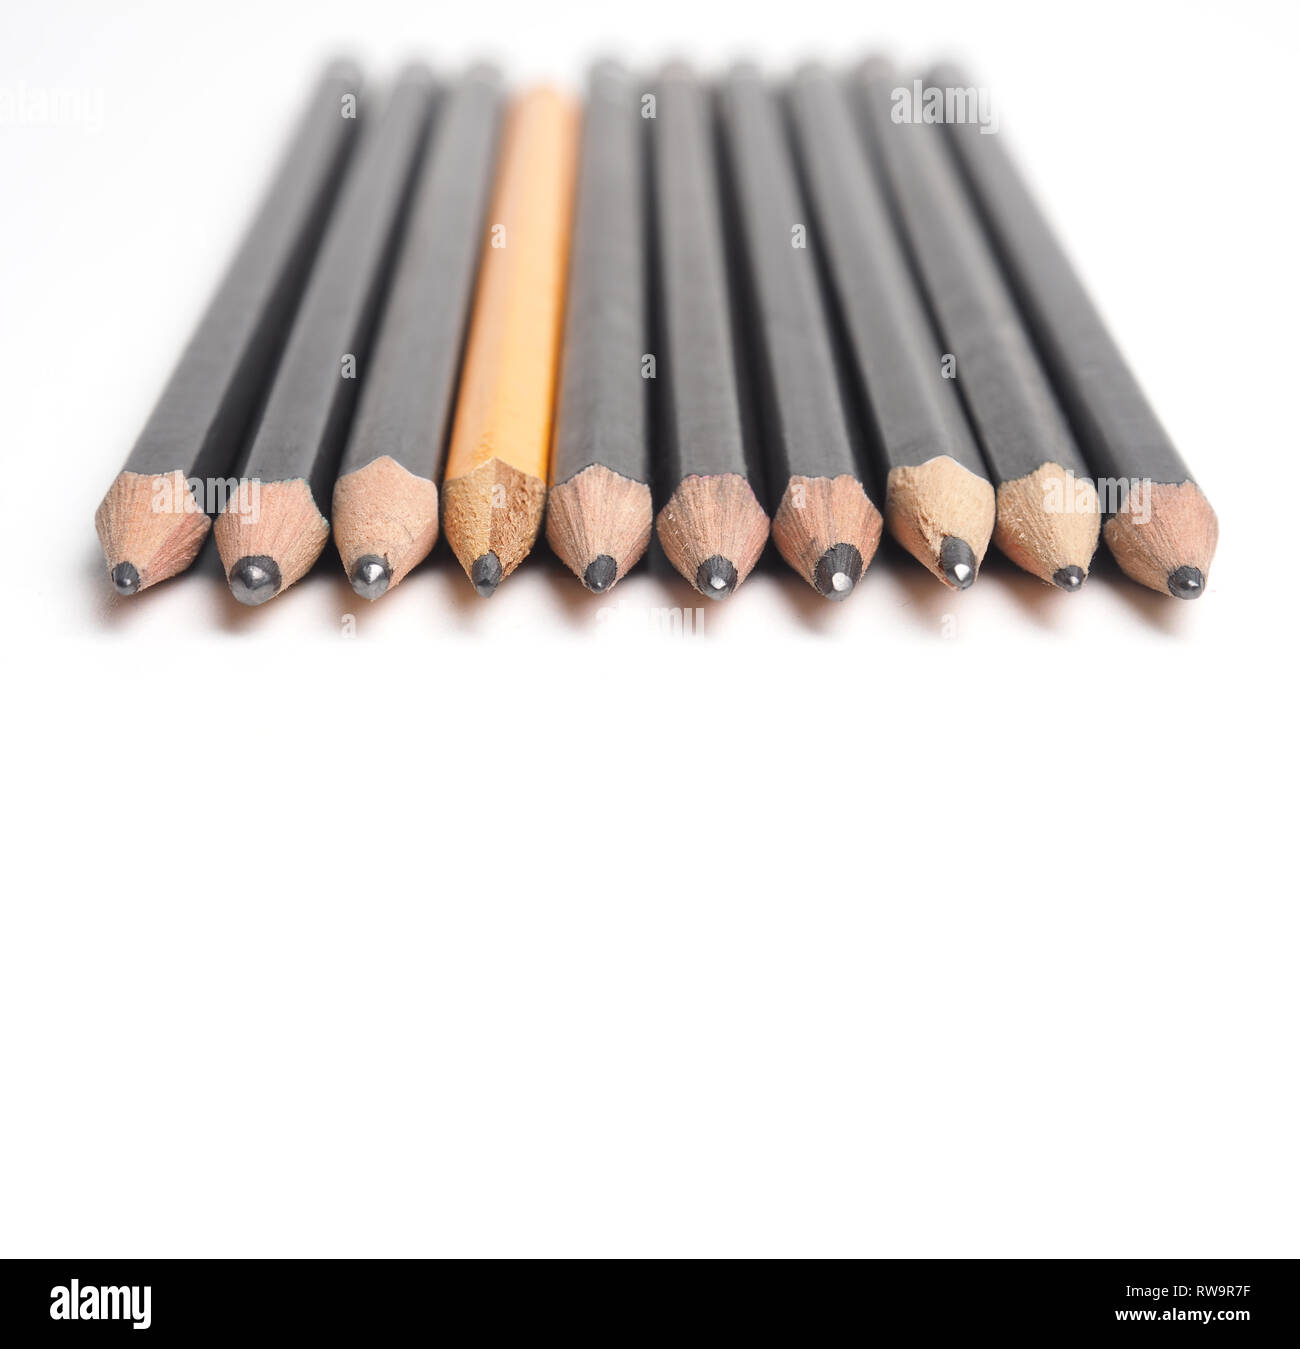 Set of Artist pencils in a row on a white table with space for text, selective focus on the foreground Stock Photo